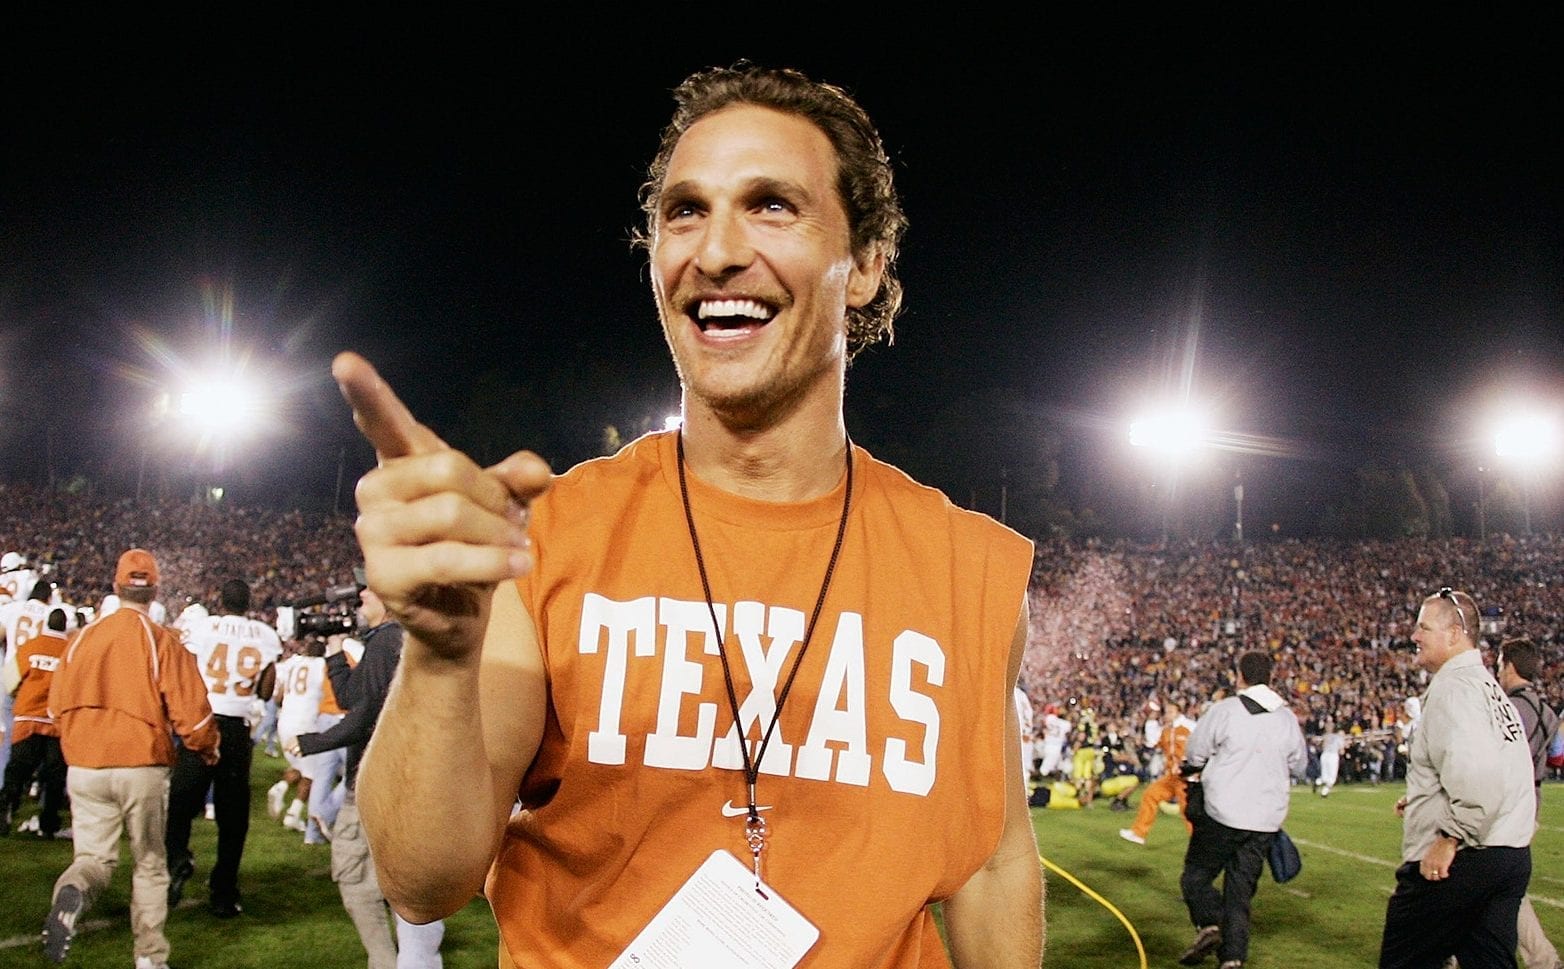 Matthew McConaughey Strongly Considering Running For Texas’ Governor